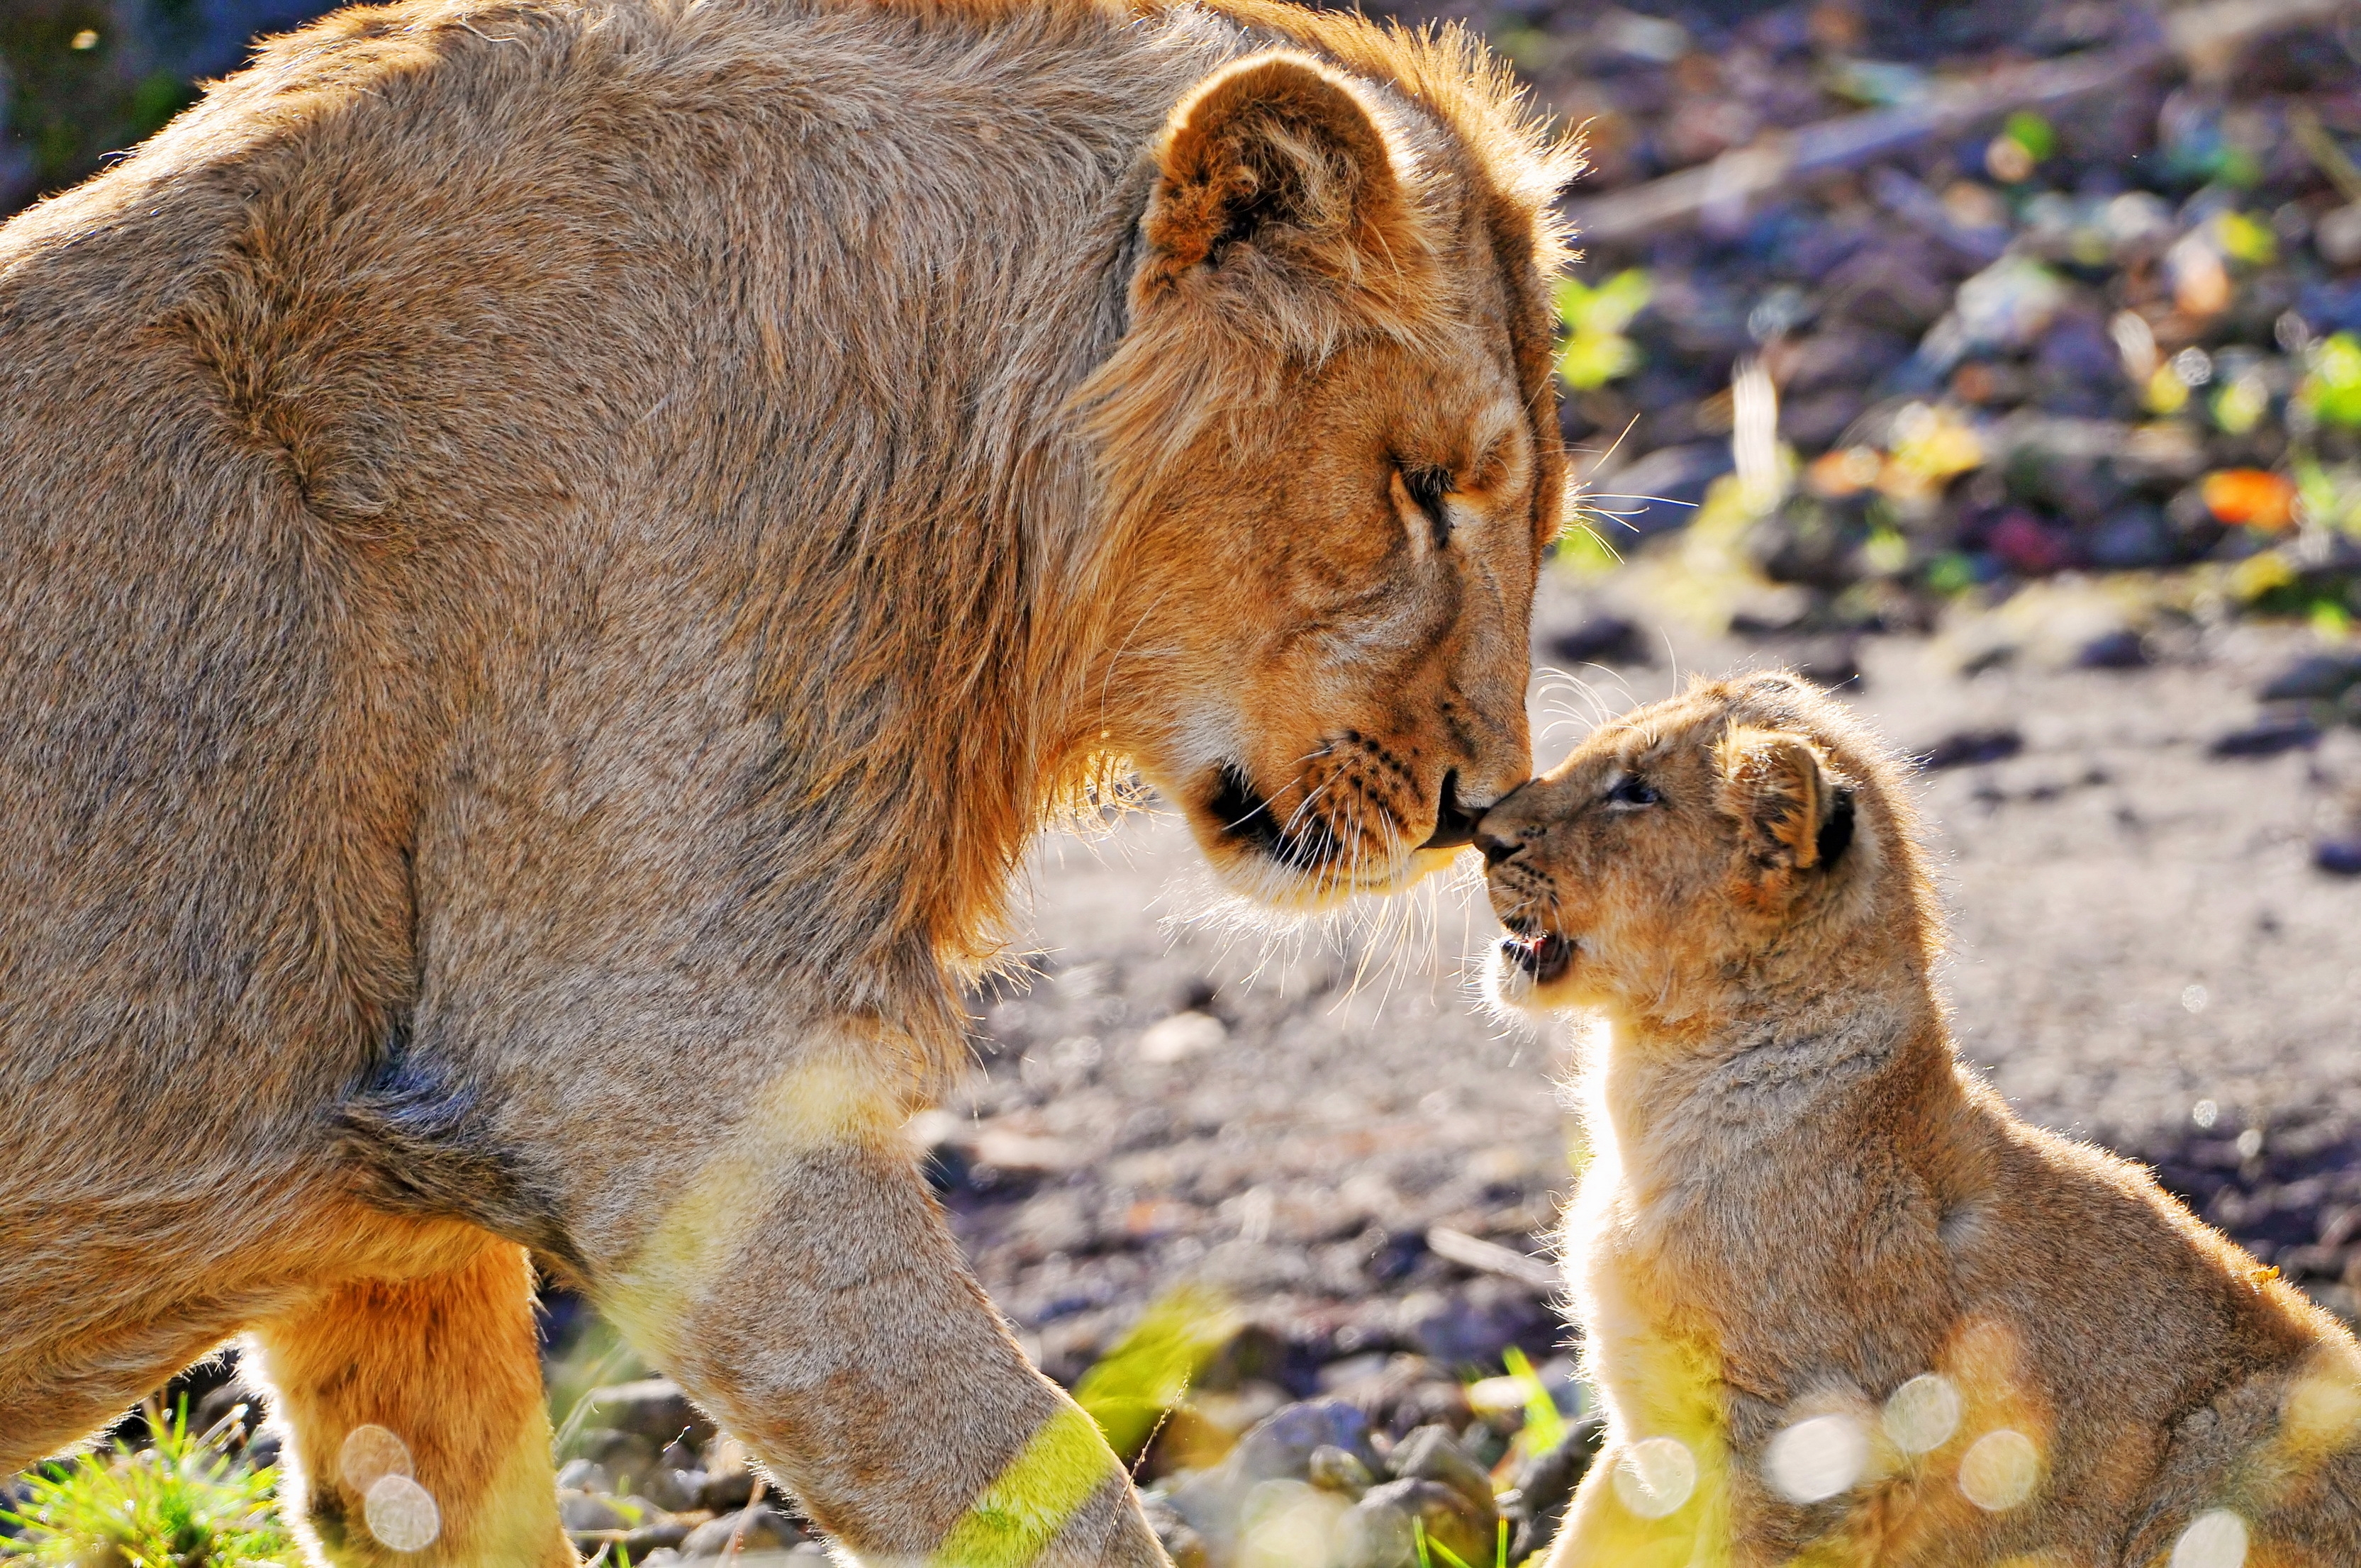 lioness, lion cub, young, animals, lion, predator, care, joey, tenderness, attention